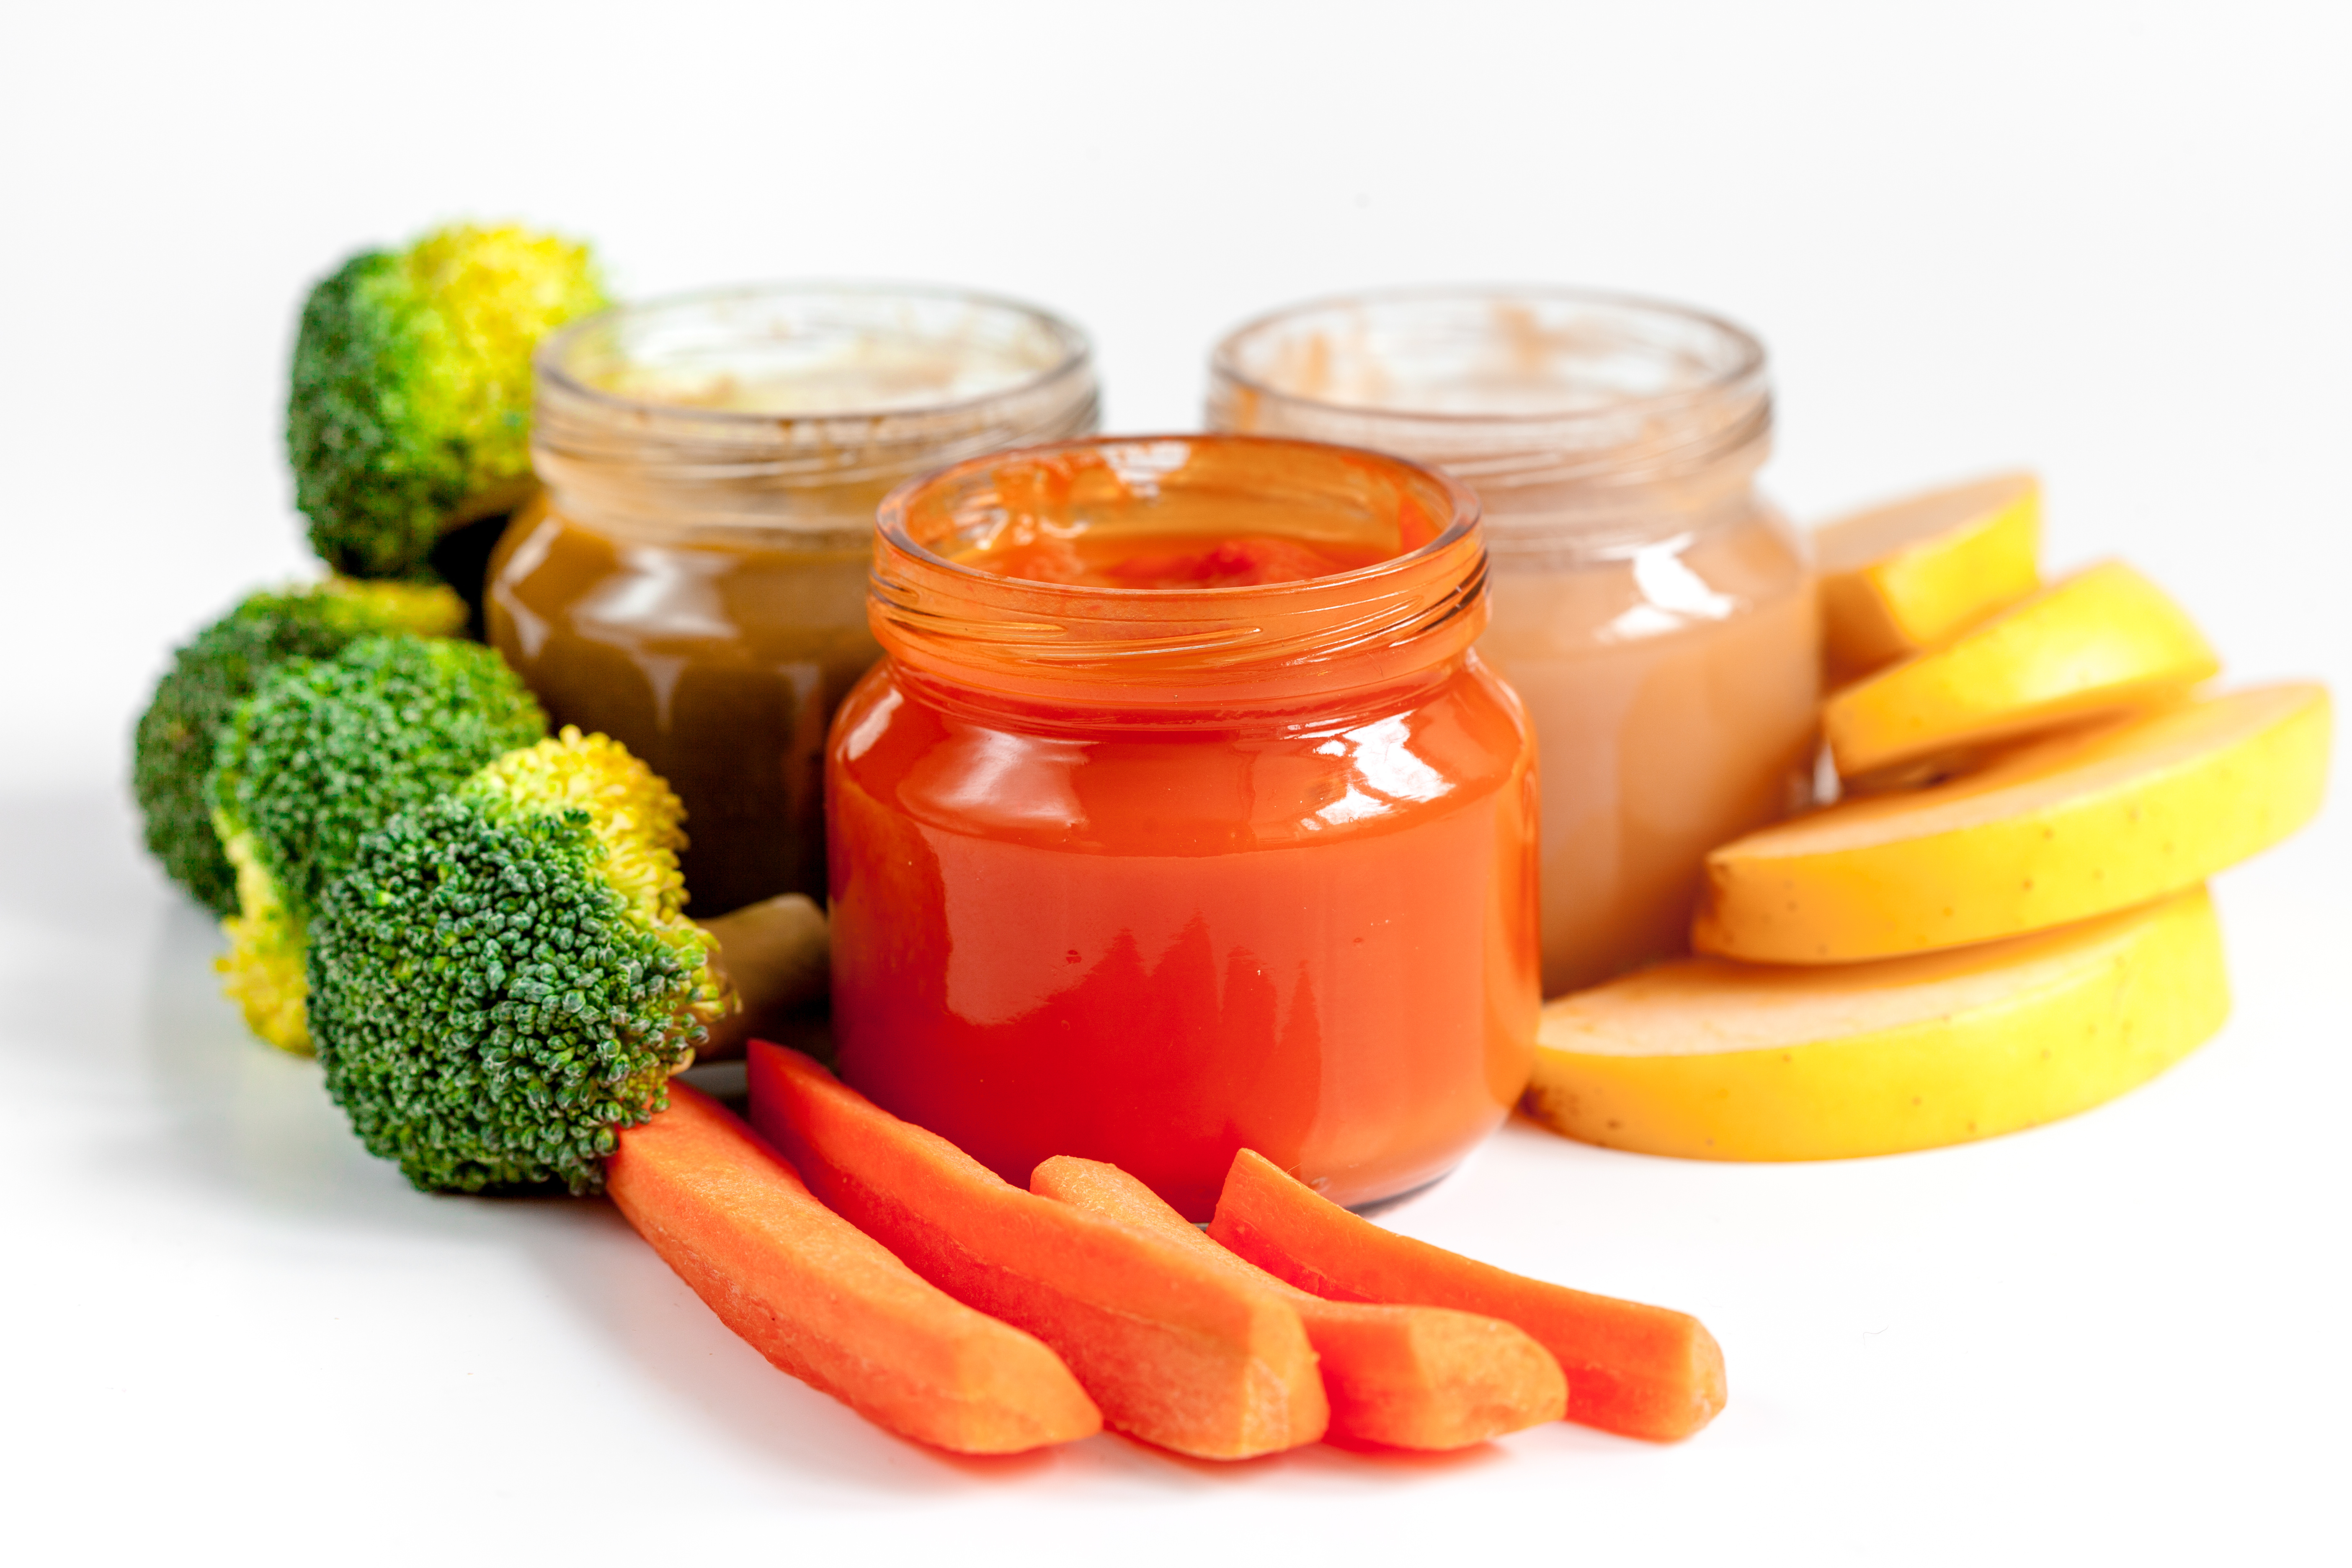 Three jars of baby food surrounded by cut-up vegetables and fruit